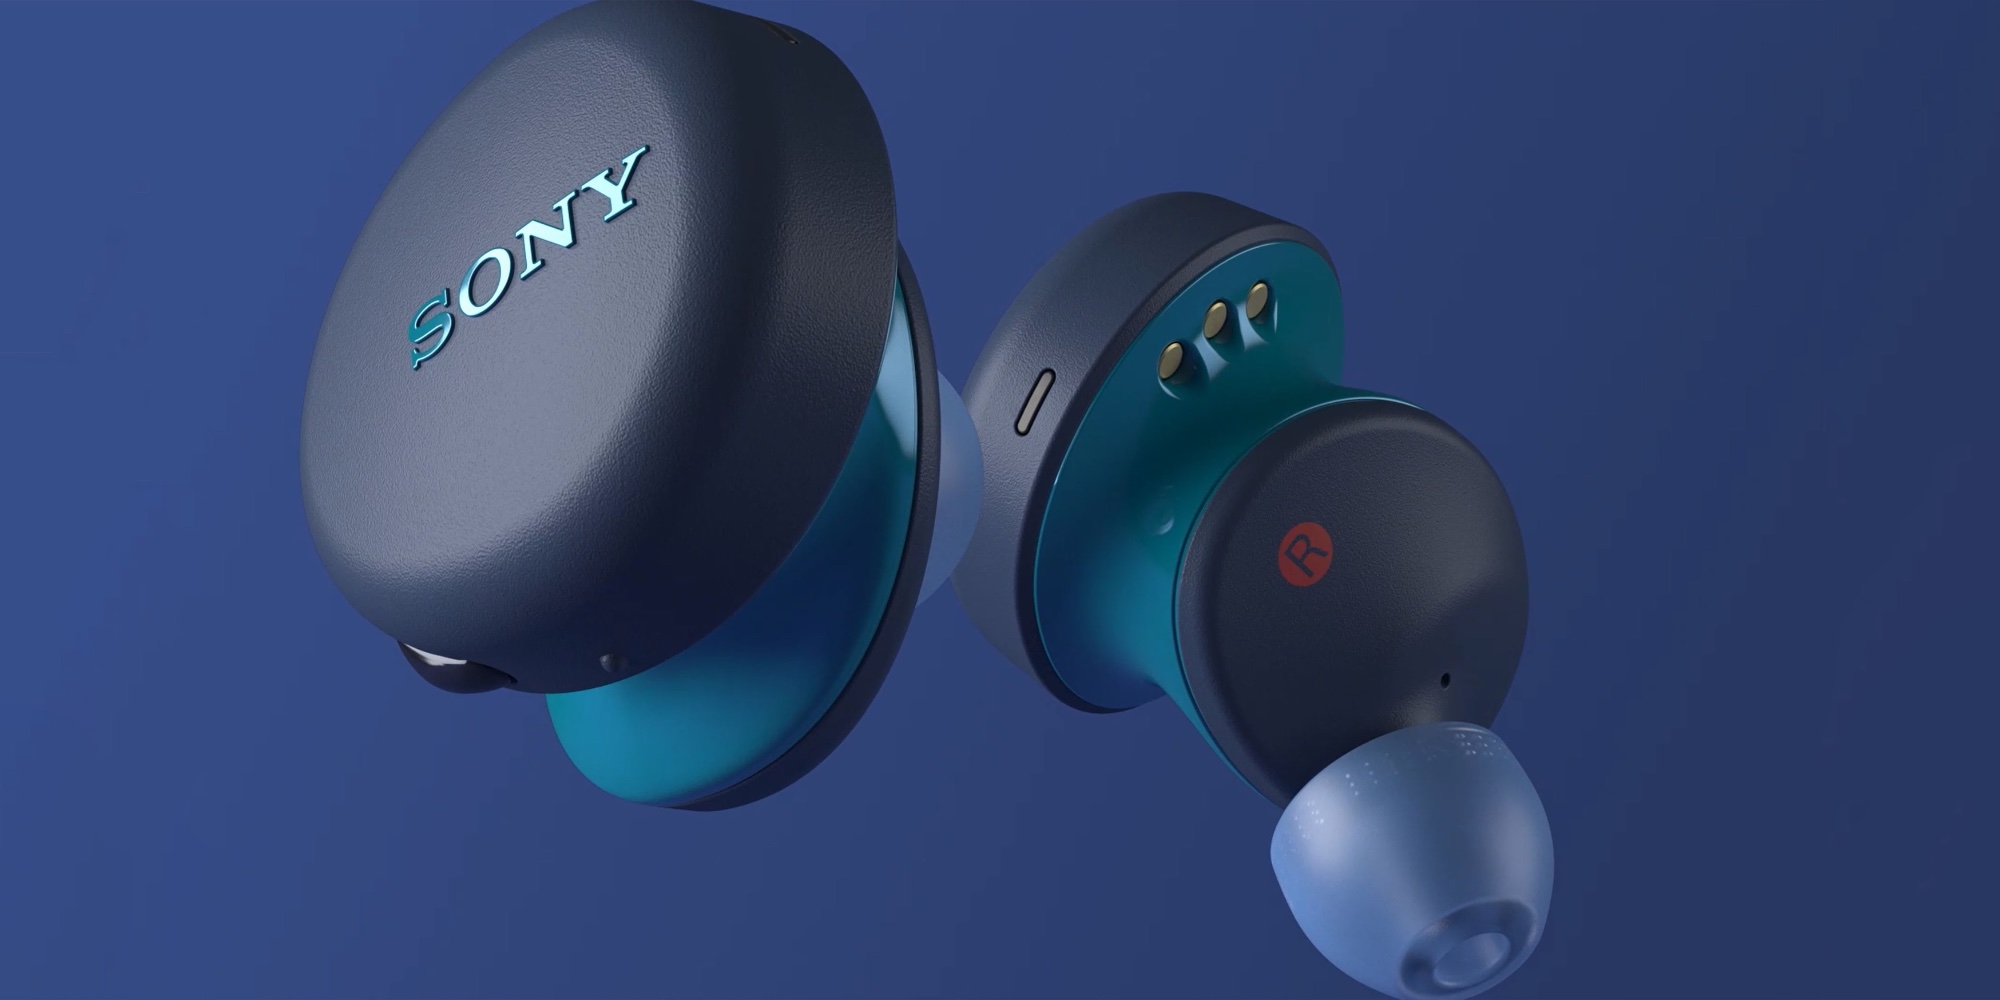 Sony True Wireless Earbuds debut alongside new ANC cans 9to5Toys